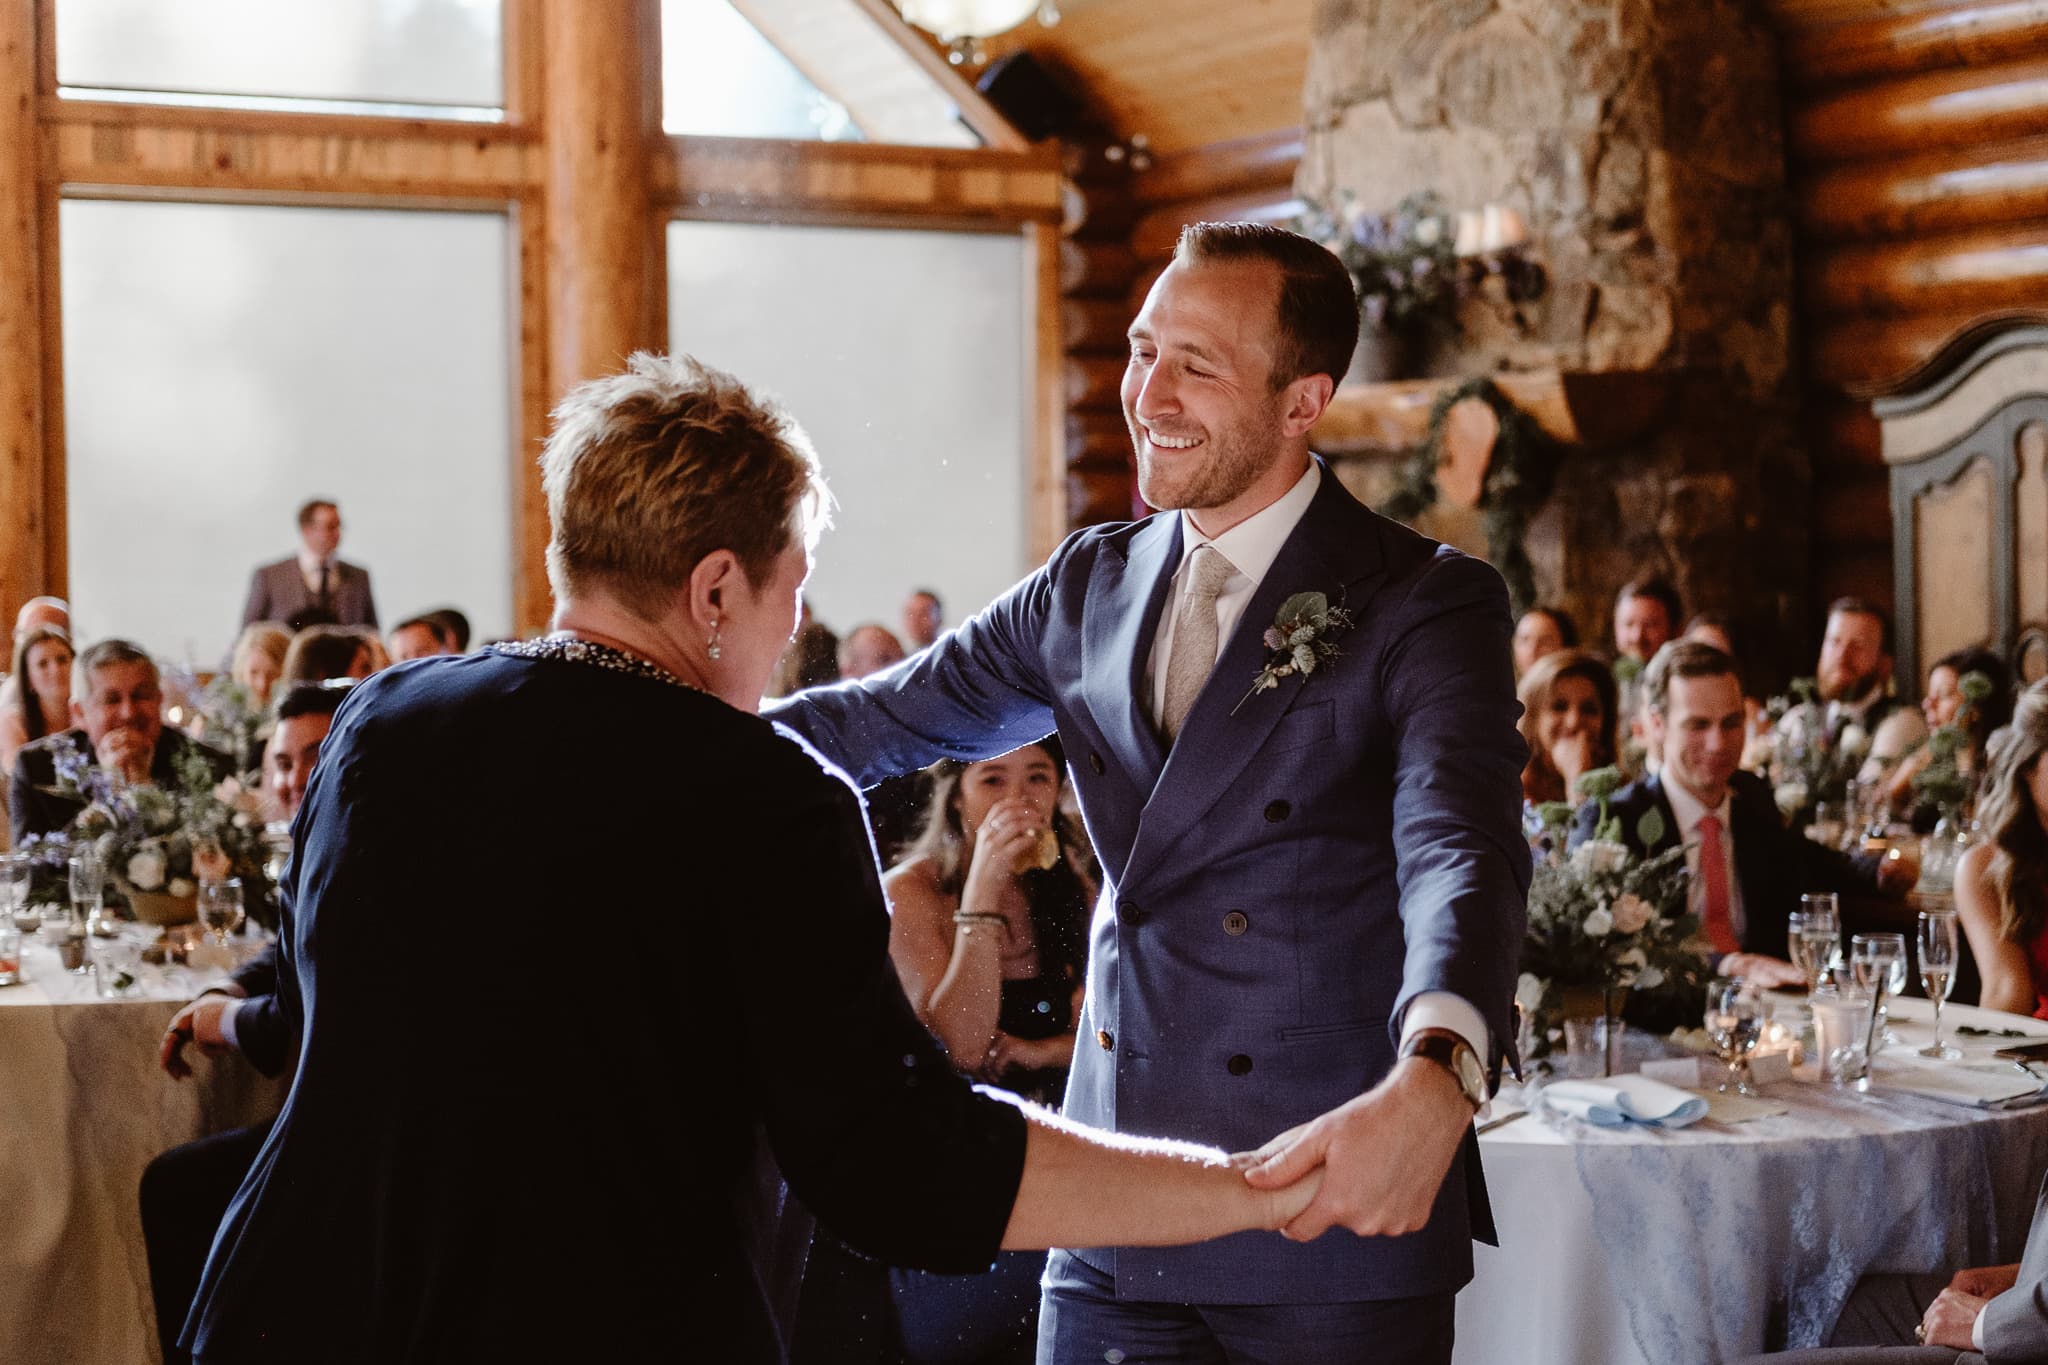 Bride dancing with her father at Breckenridge Nordic Center wedding, Summit County wedding photographer